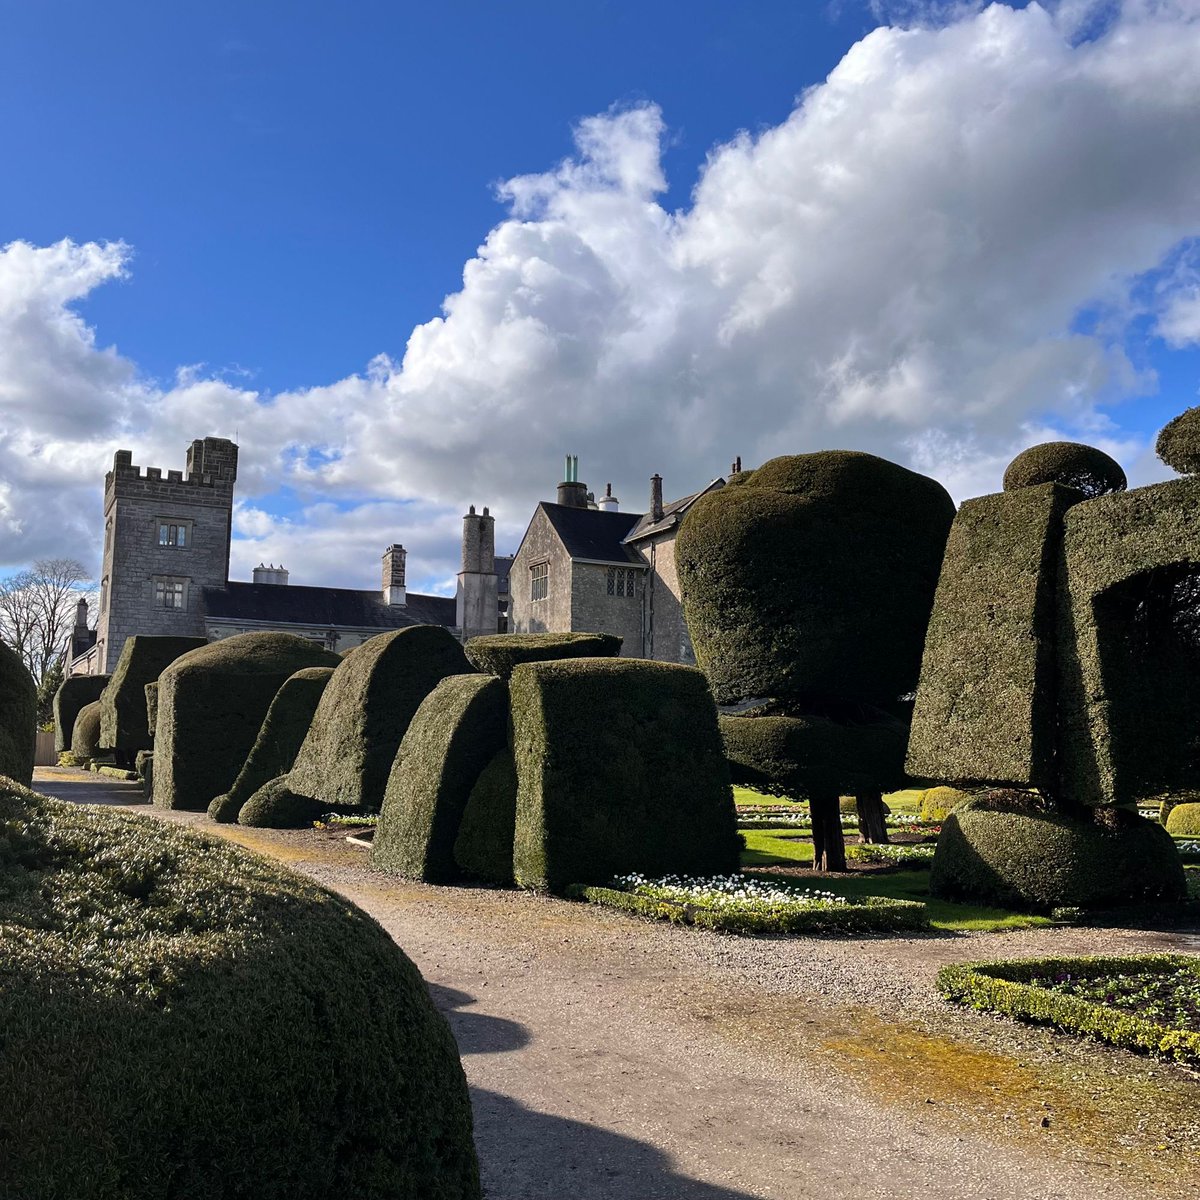 Hedge Tetris ❇️🟩✳️ Fabulous trip to Levens Hall in the Lake District. 🌳 Topiary for days, incredible carved oak and a ghost story thrown in for good measure. 👻 Has anyone else been to this place? #LakeDistrict #LevensHall #Heritage #Topiary #GhostStory #GrimUpNorth